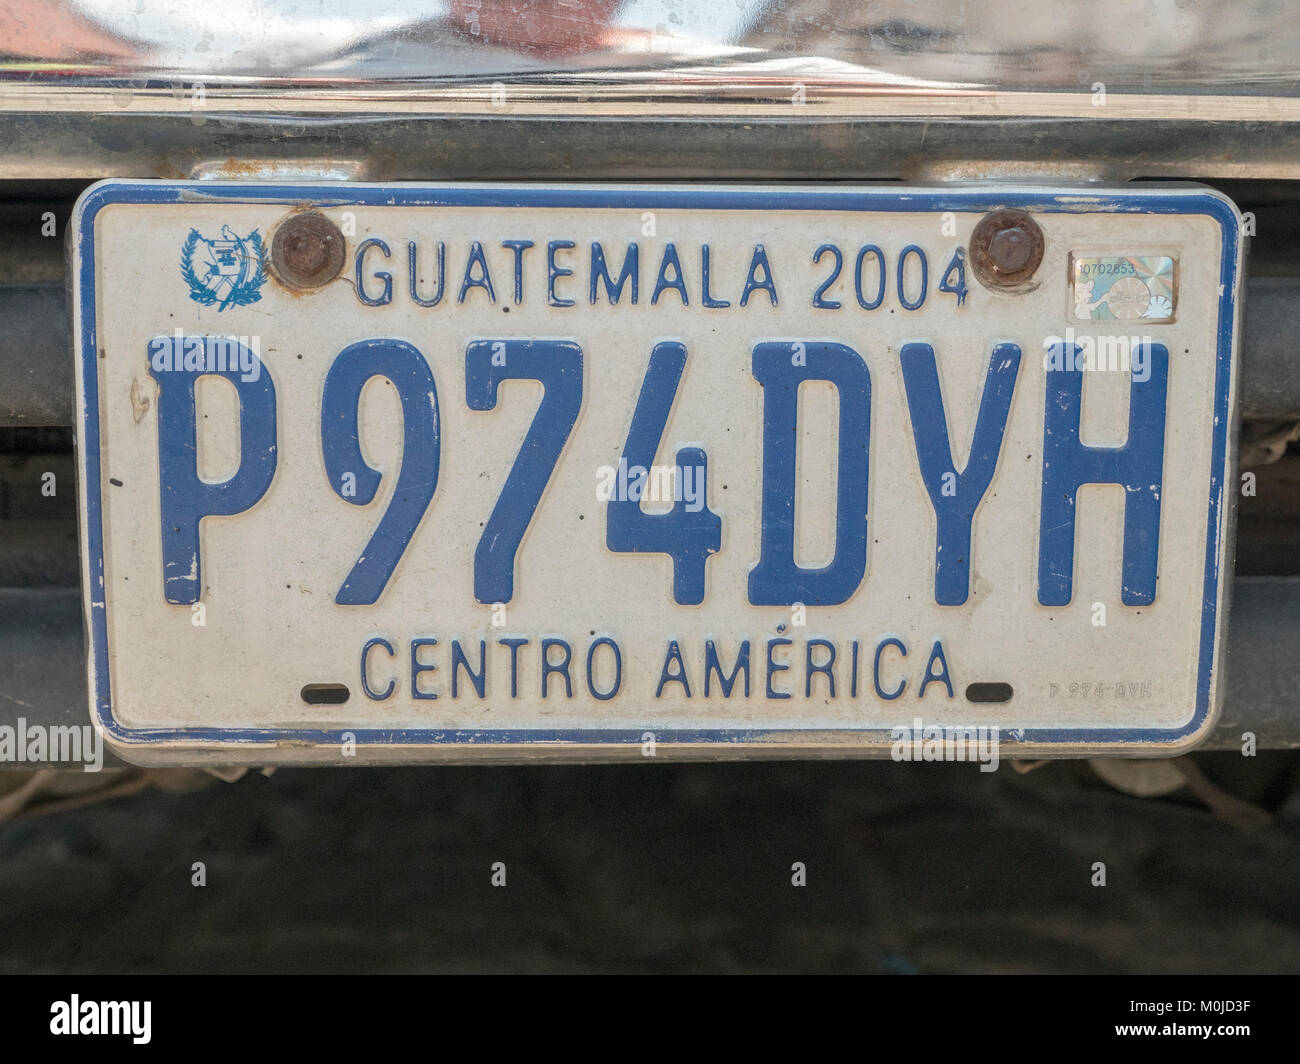 A Vehicle Licence Tag Plate On A Car In Guatemala Central America Stock Photo